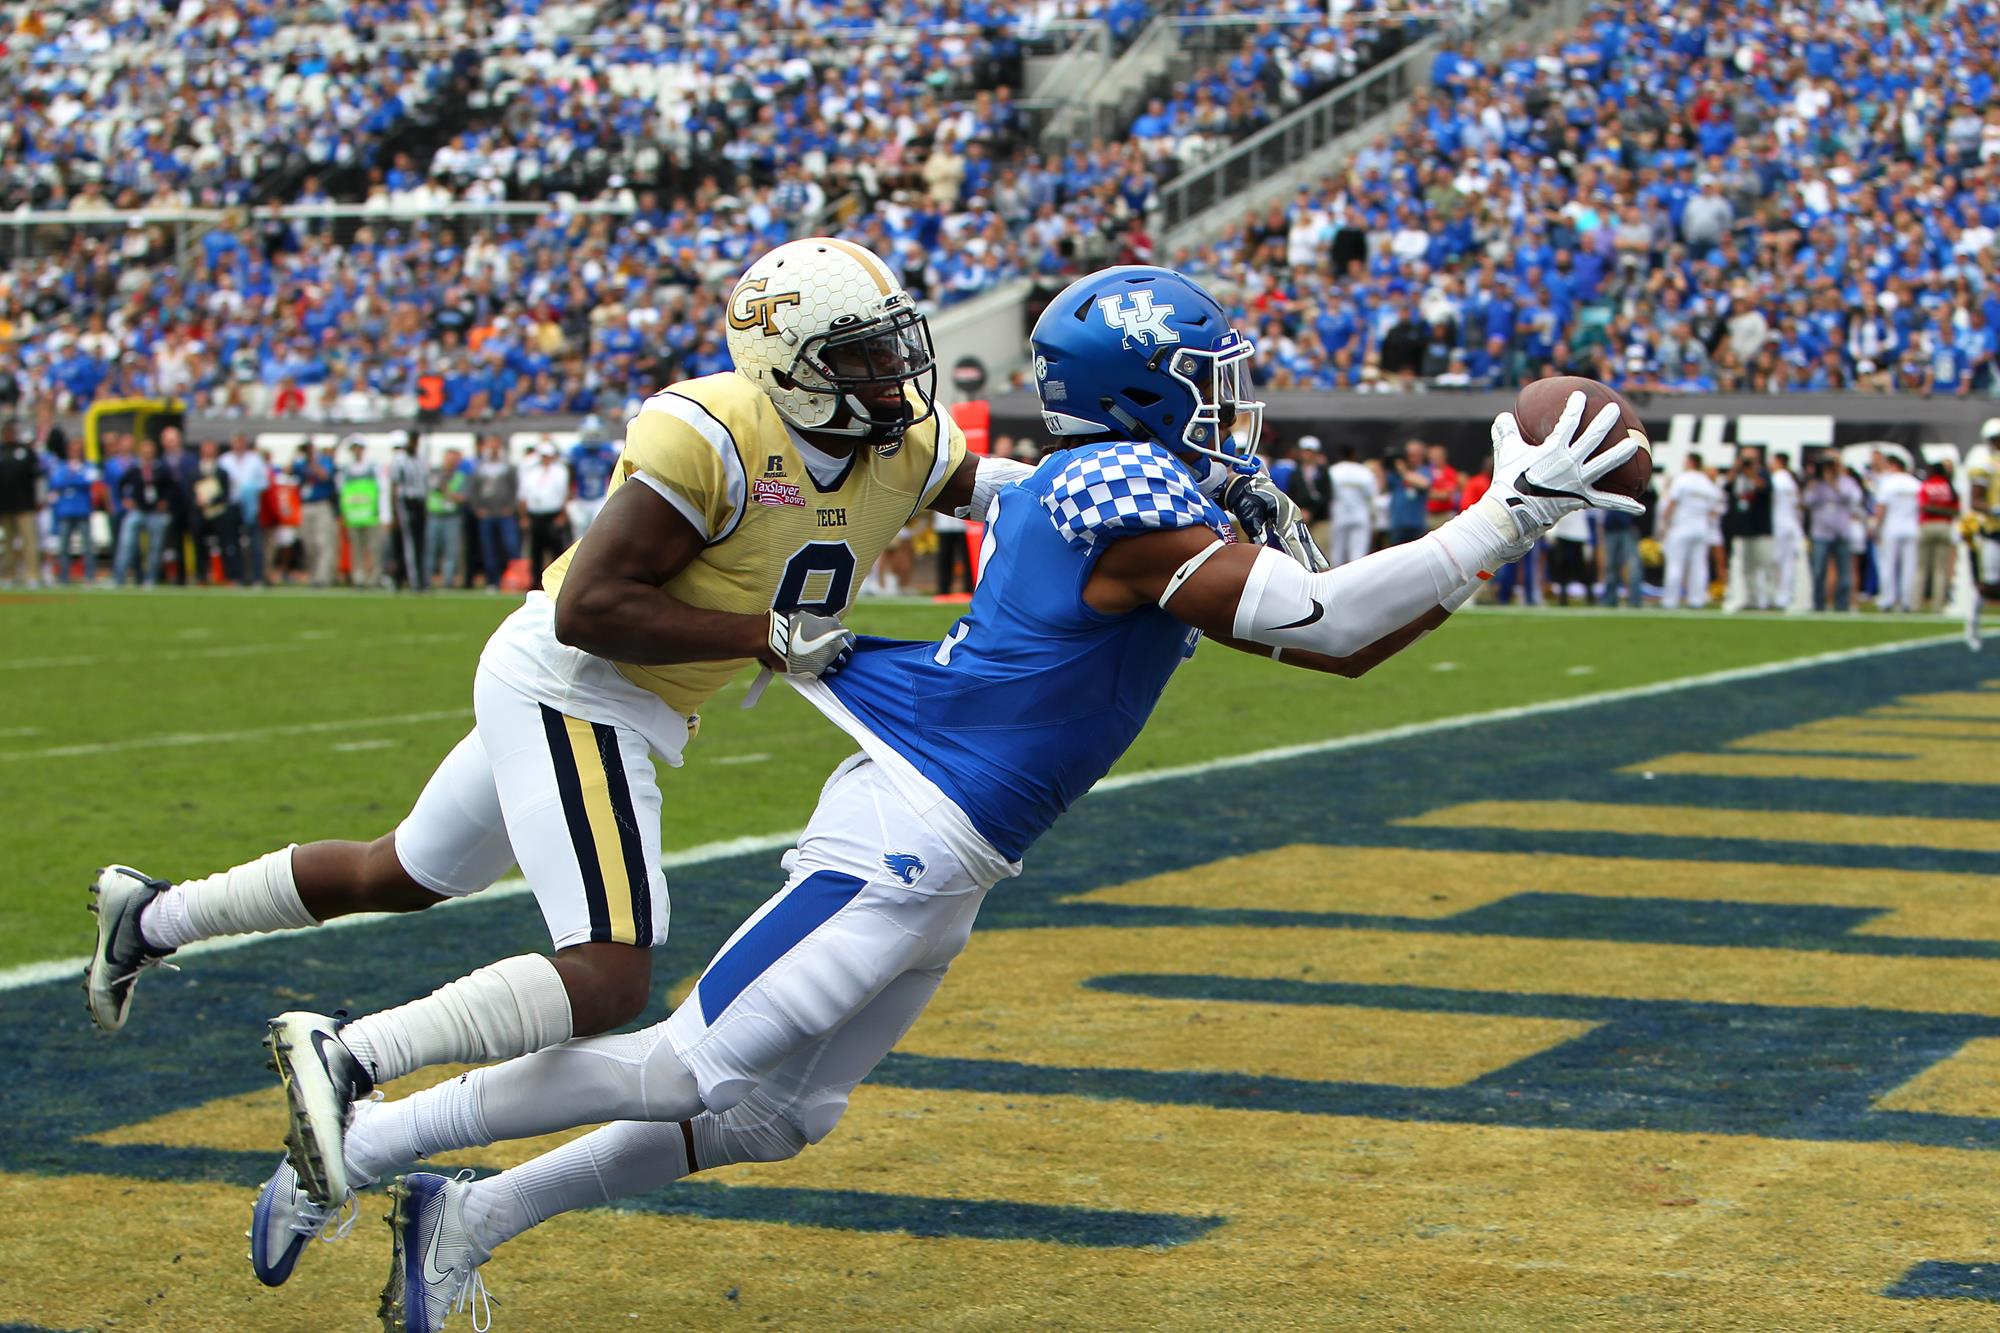 UK Football’s Dorian Baker Out ‘Significant Time’ with Ankle Injury